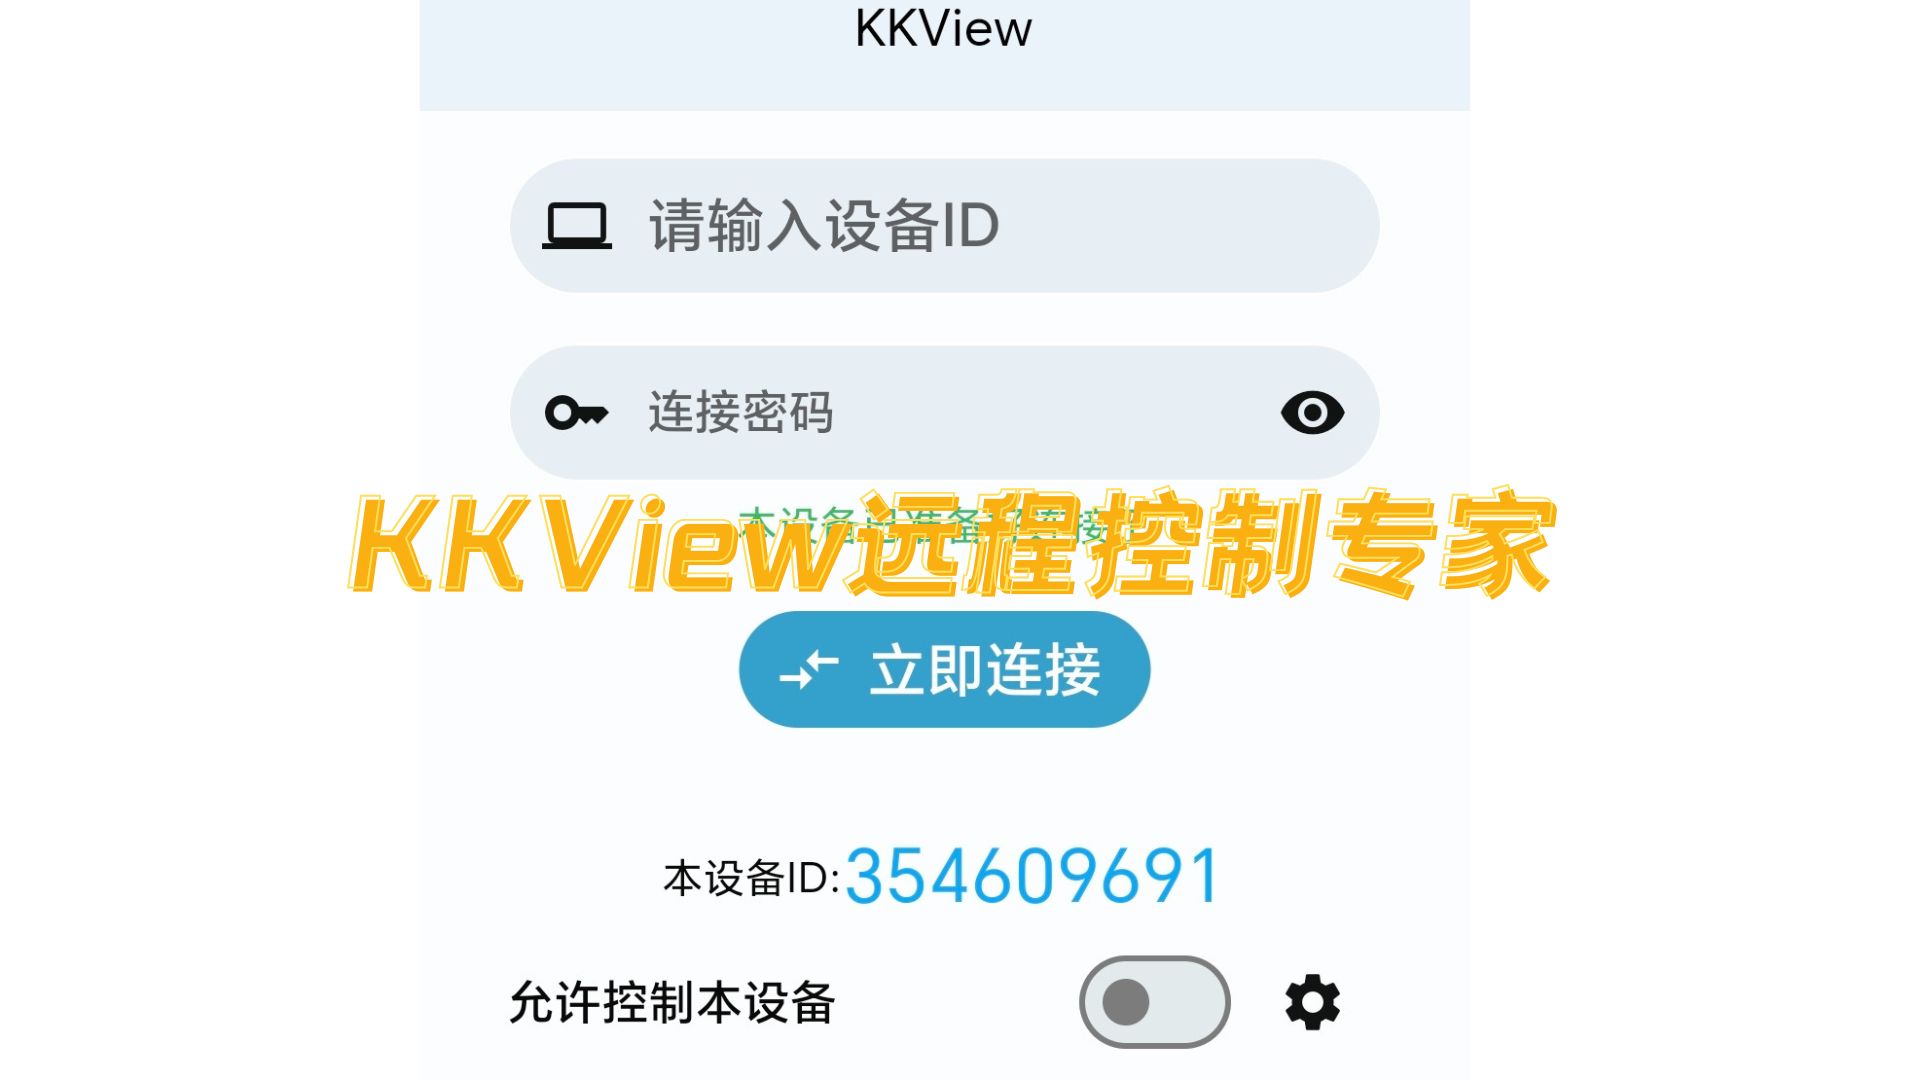 KKVIEW远程: <span style='color:red;'>安</span><span style='color:red;'>卓</span><span style='color:red;'>免费</span>远程控制<span style='color:red;'>软件</span>